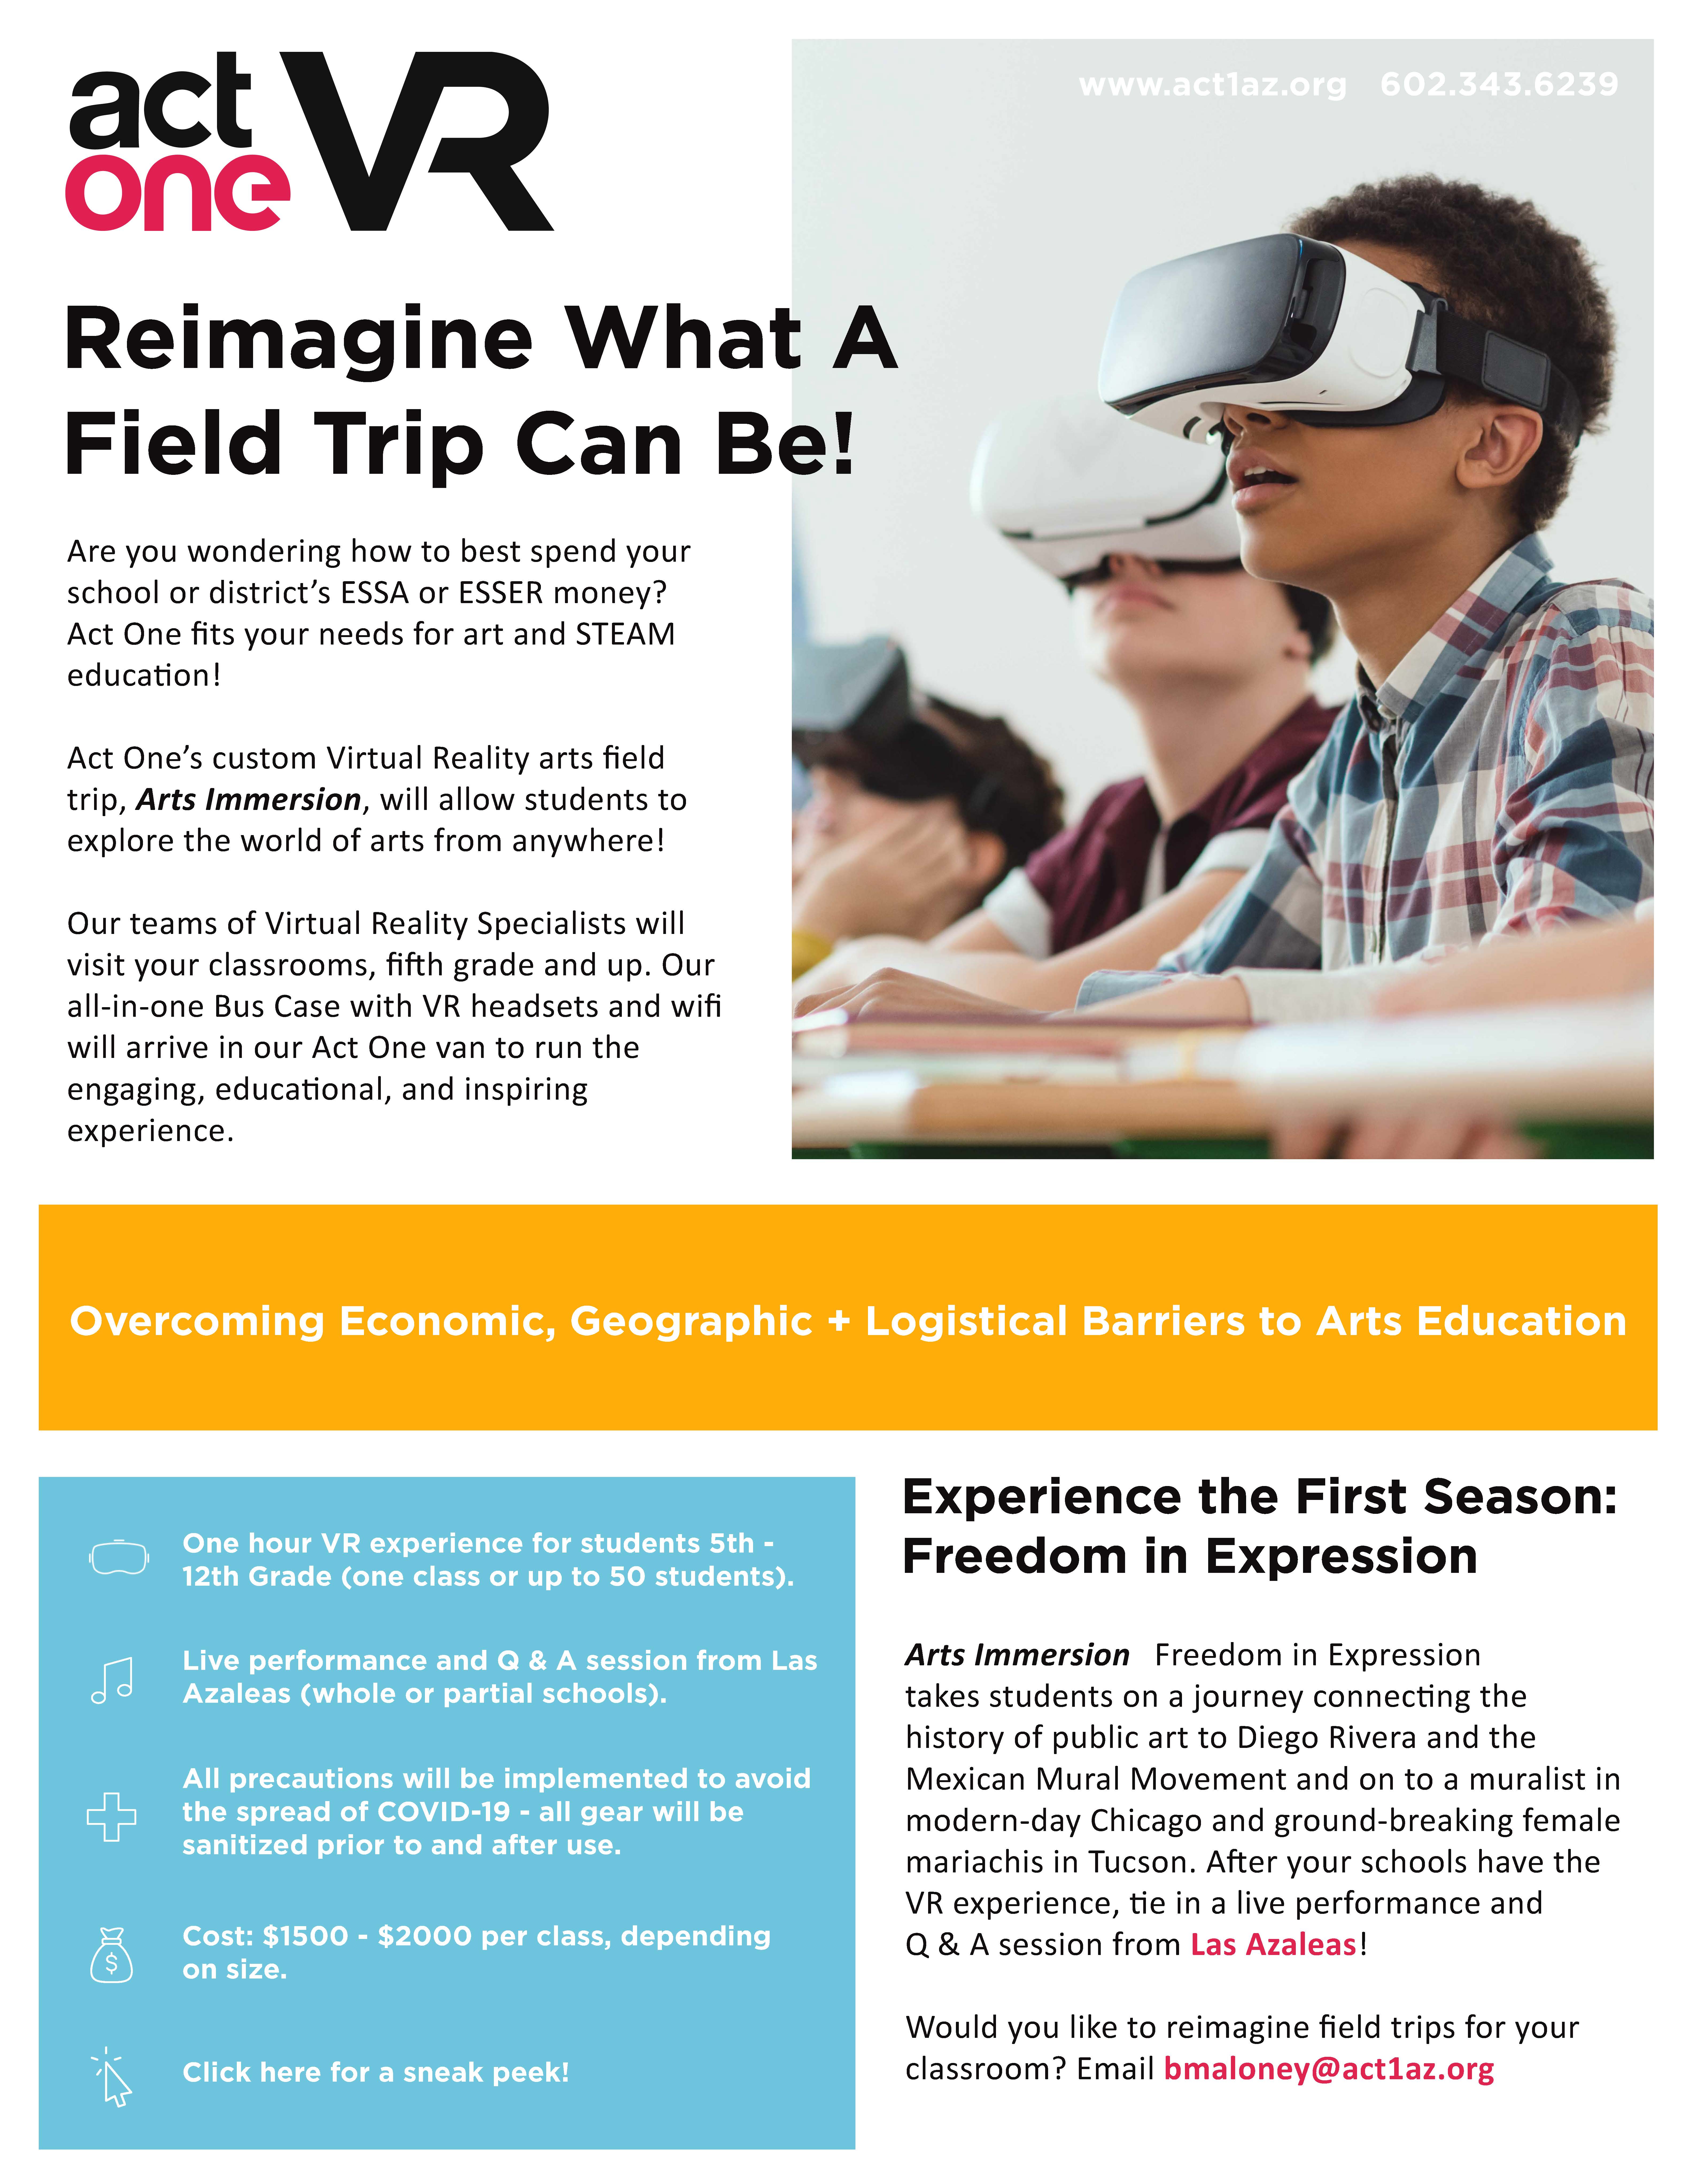 Reimagine What A Field Trip Can Be! Act One VR